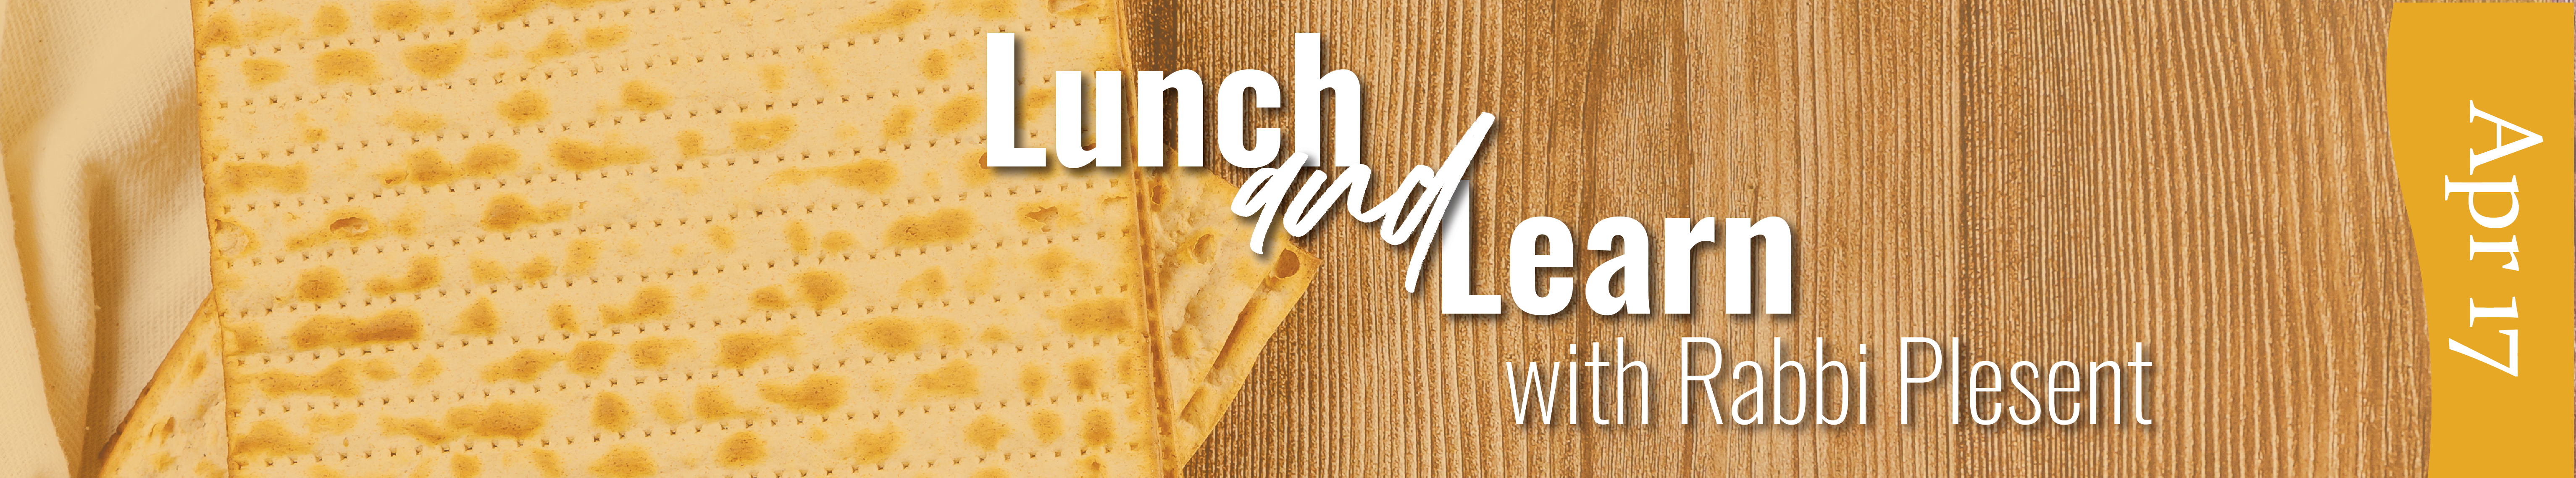 pesach lunch and learn emailArtboard 4